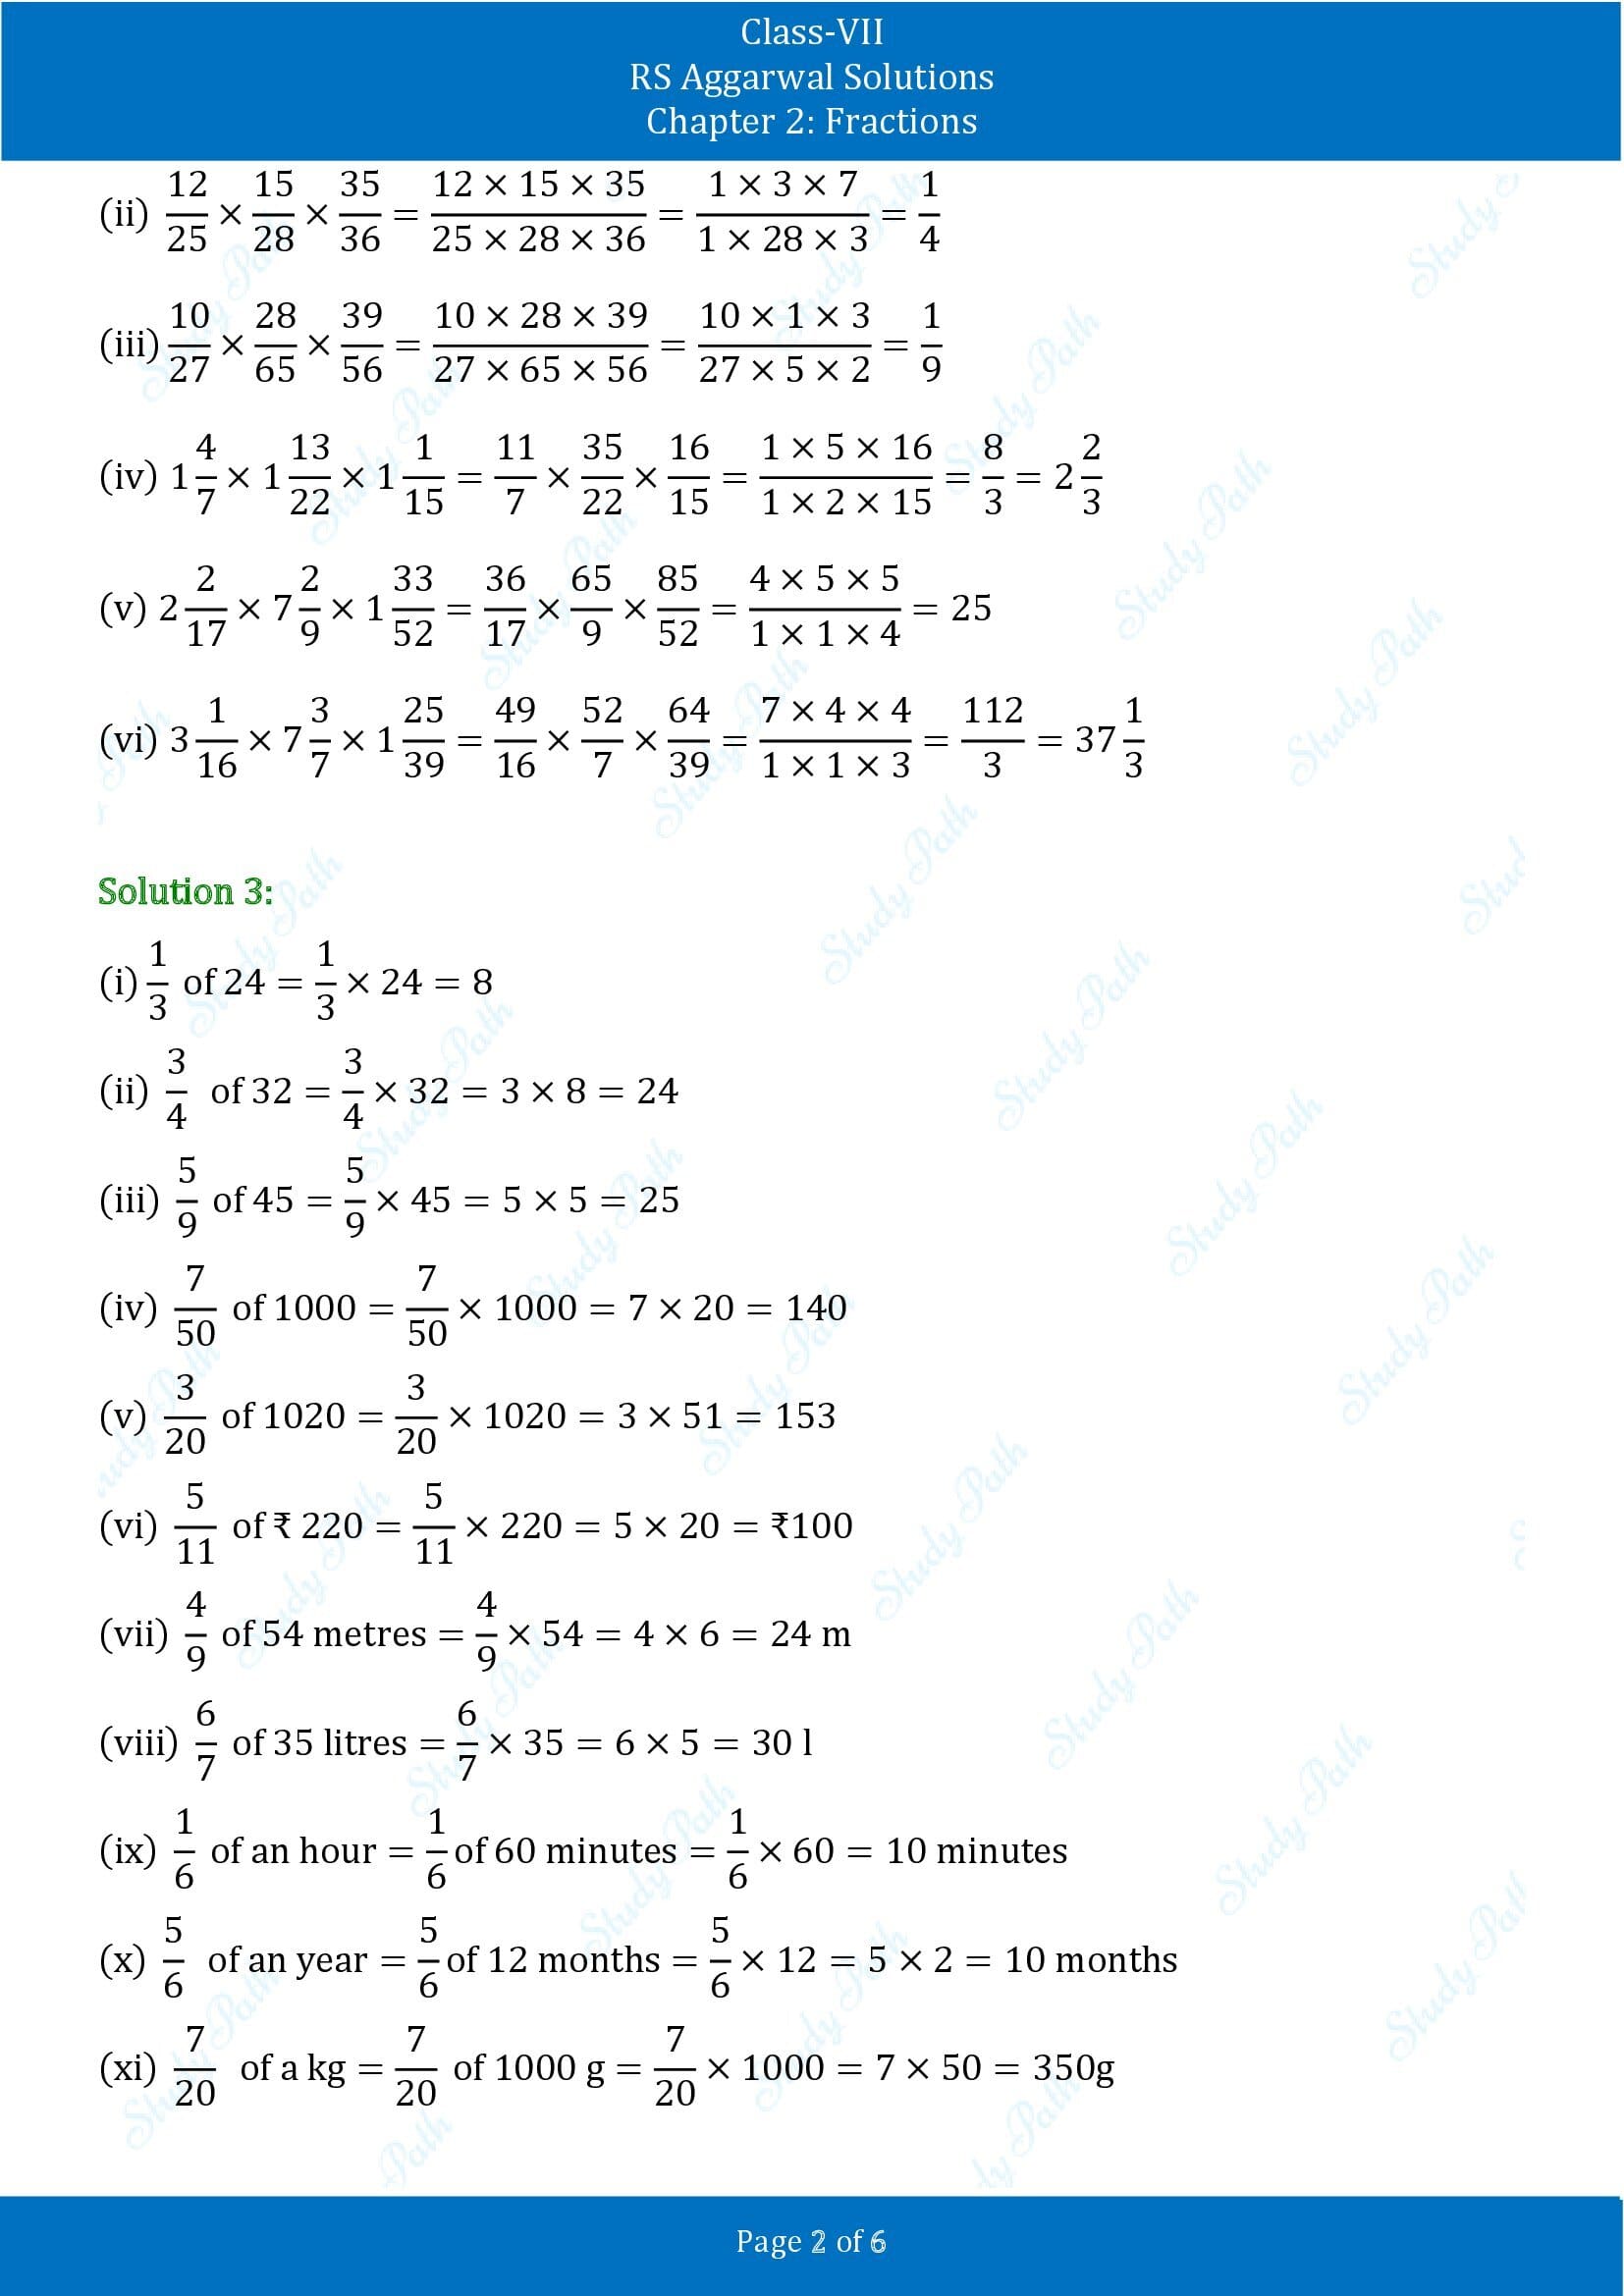 RS Aggarwal Solutions Class 7 Chapter 2 Fractions Exercise 2B 00002